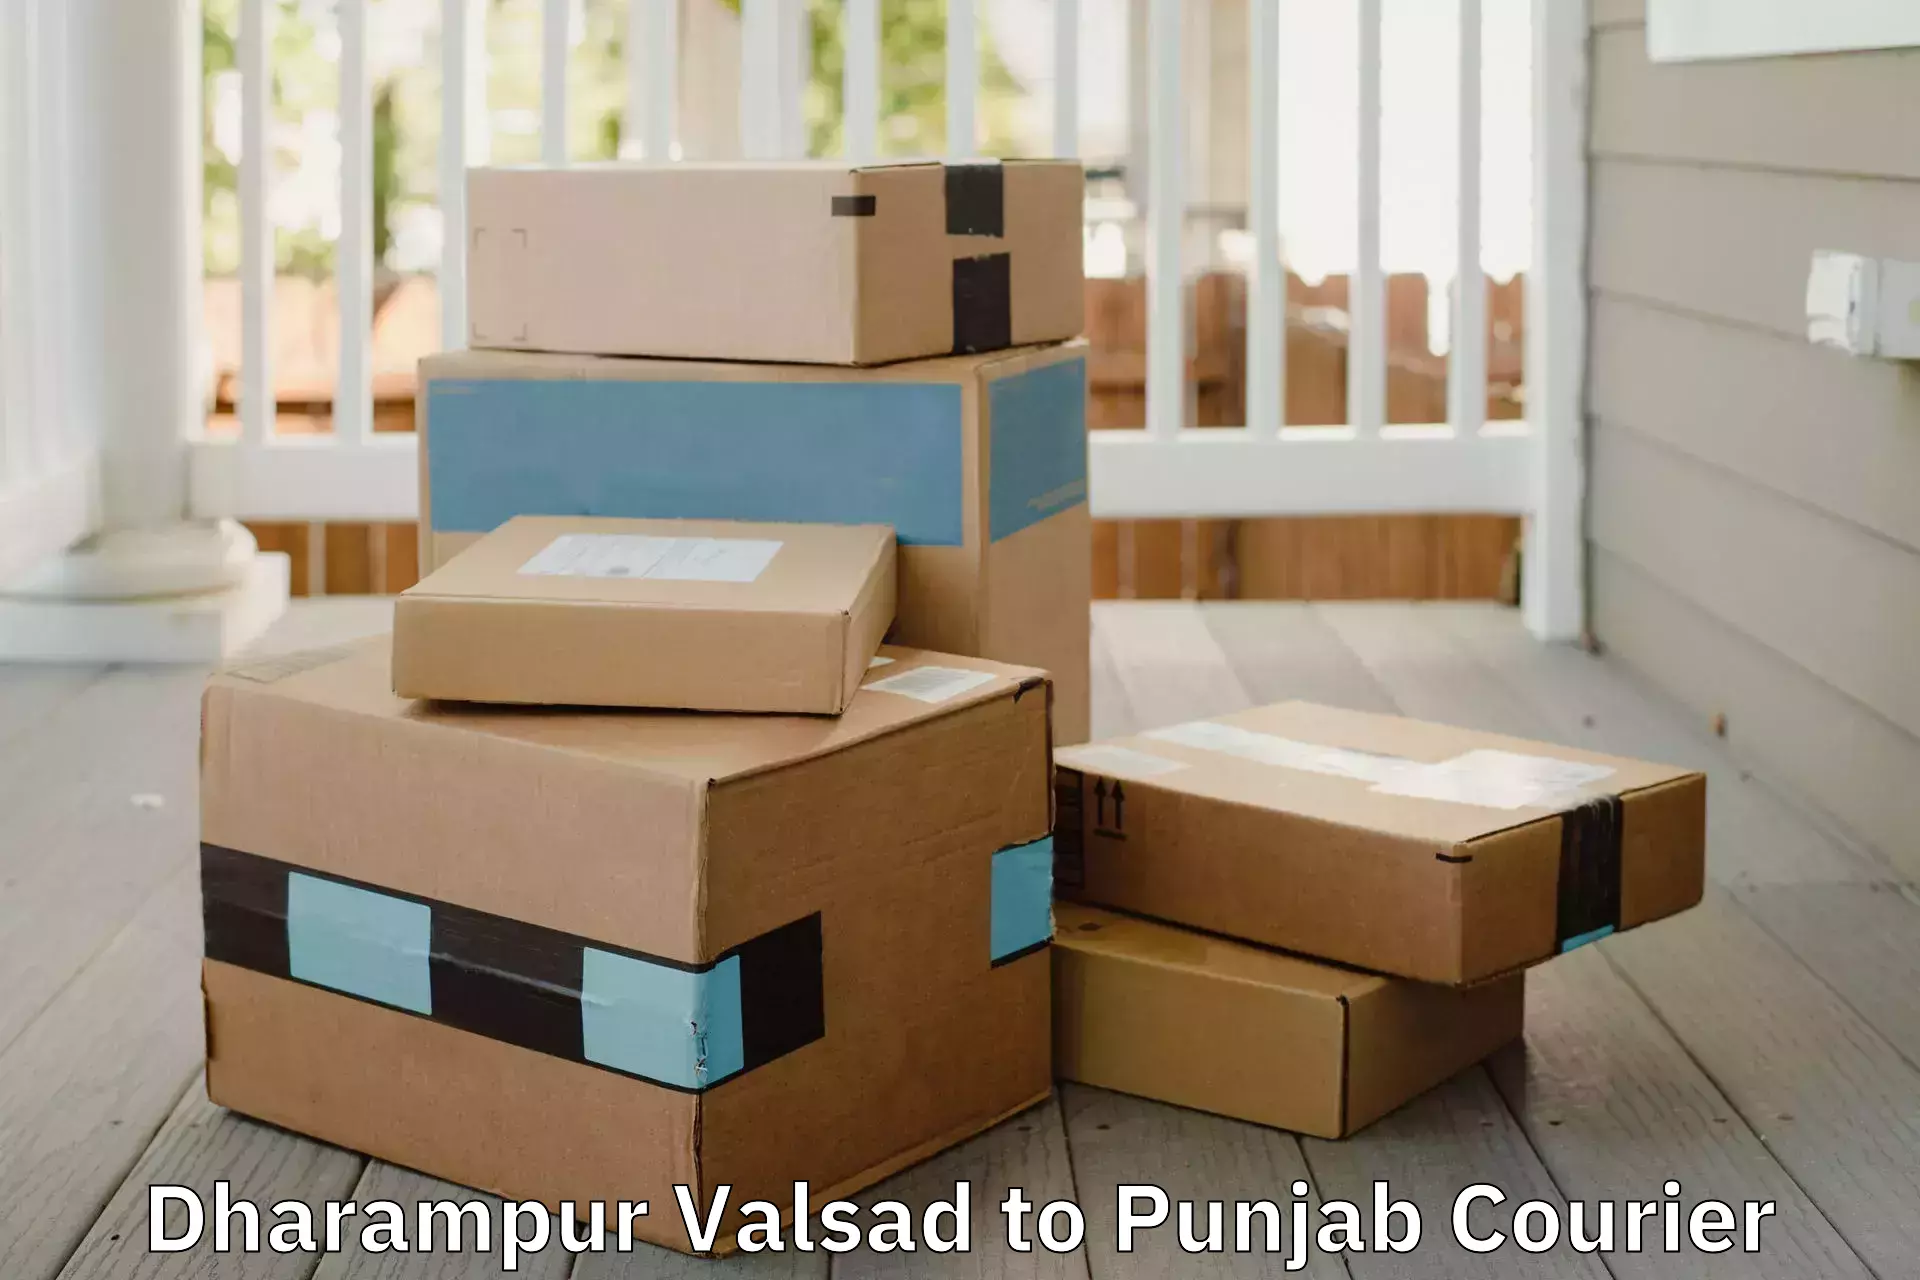 Quality relocation services Dharampur Valsad to Abohar